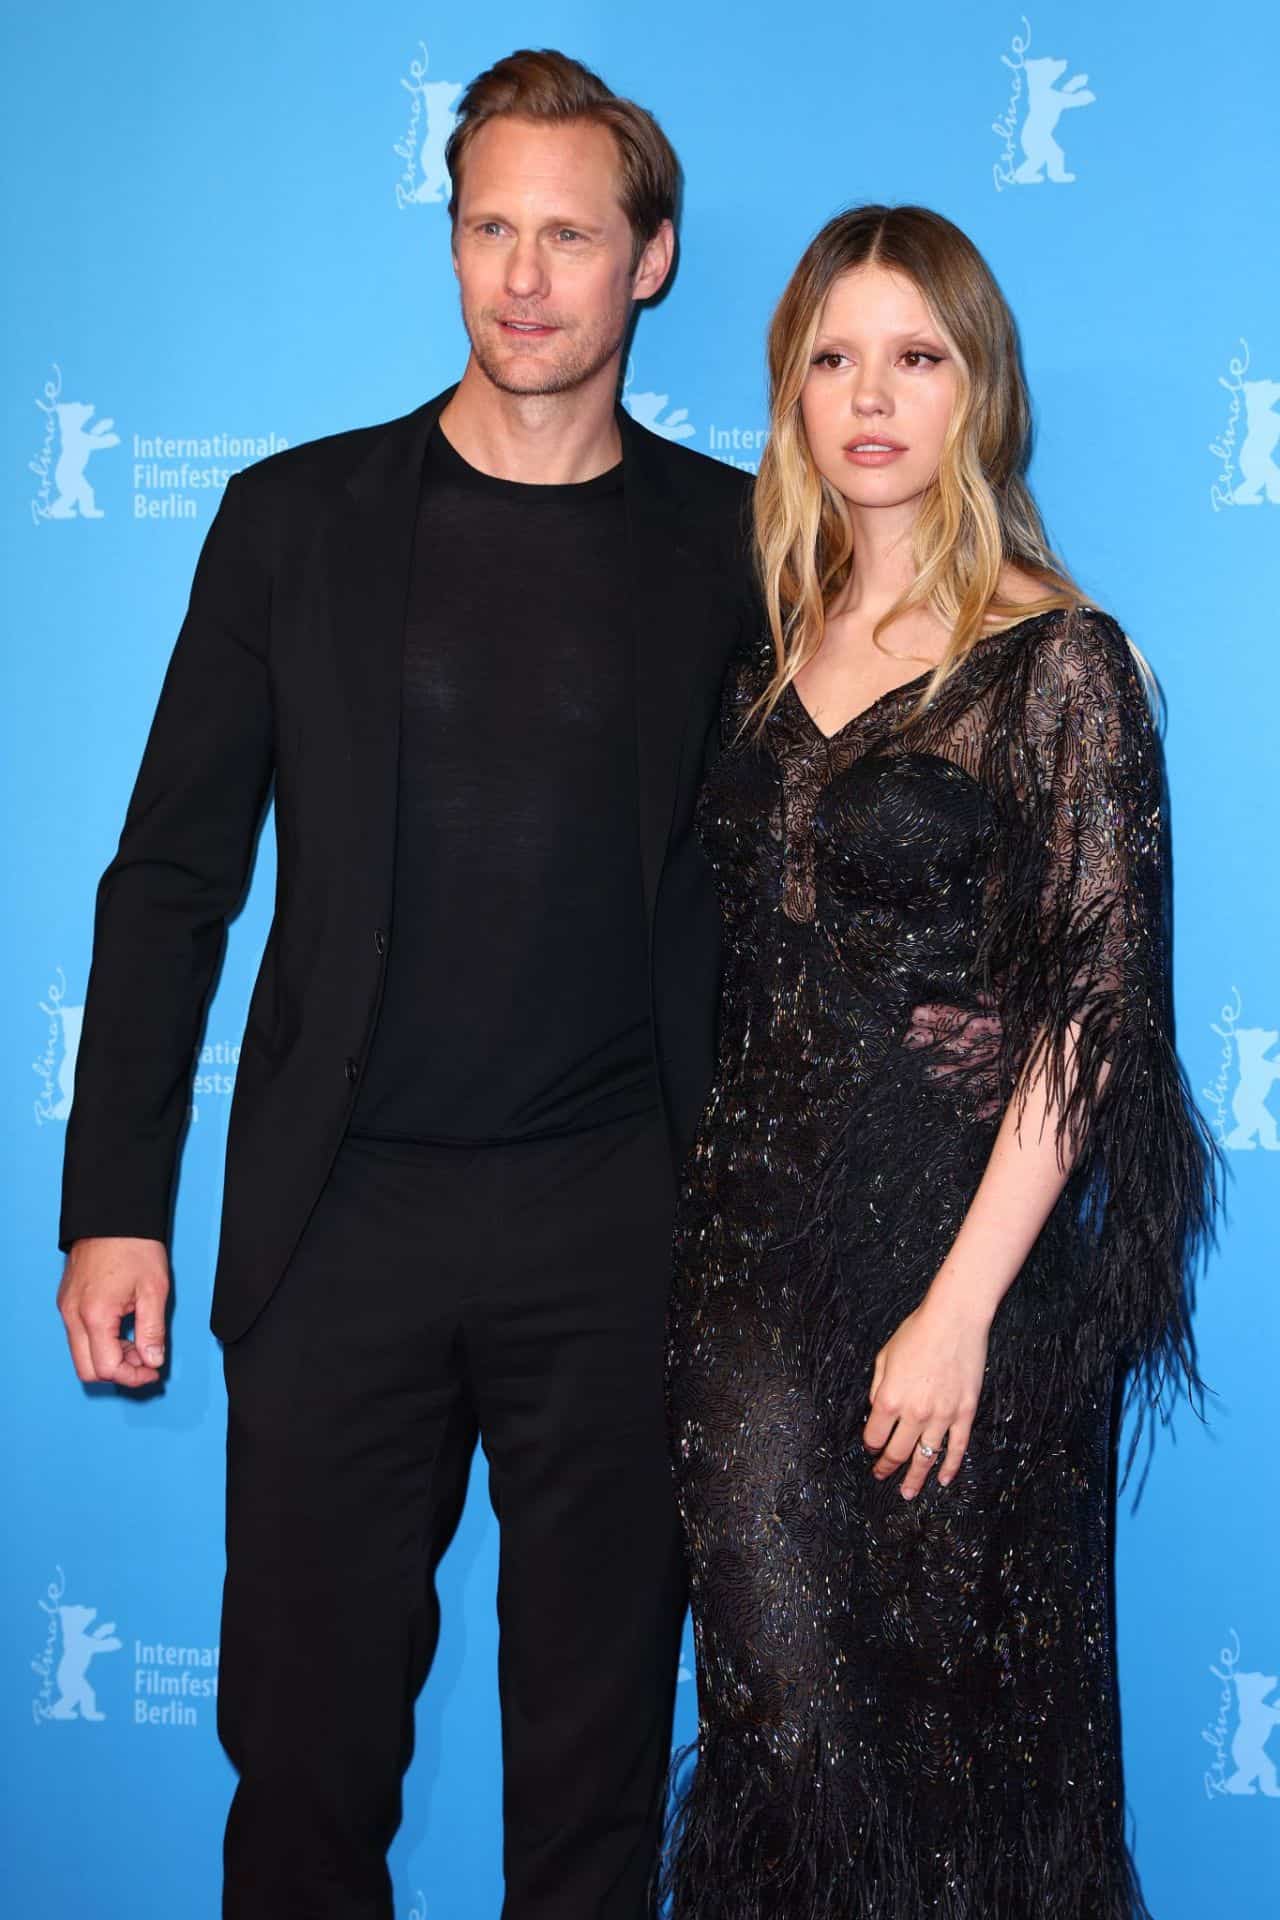 Mia Goth in Black Dress at "Infinity Pool" Premiere at 73rd Berlinale